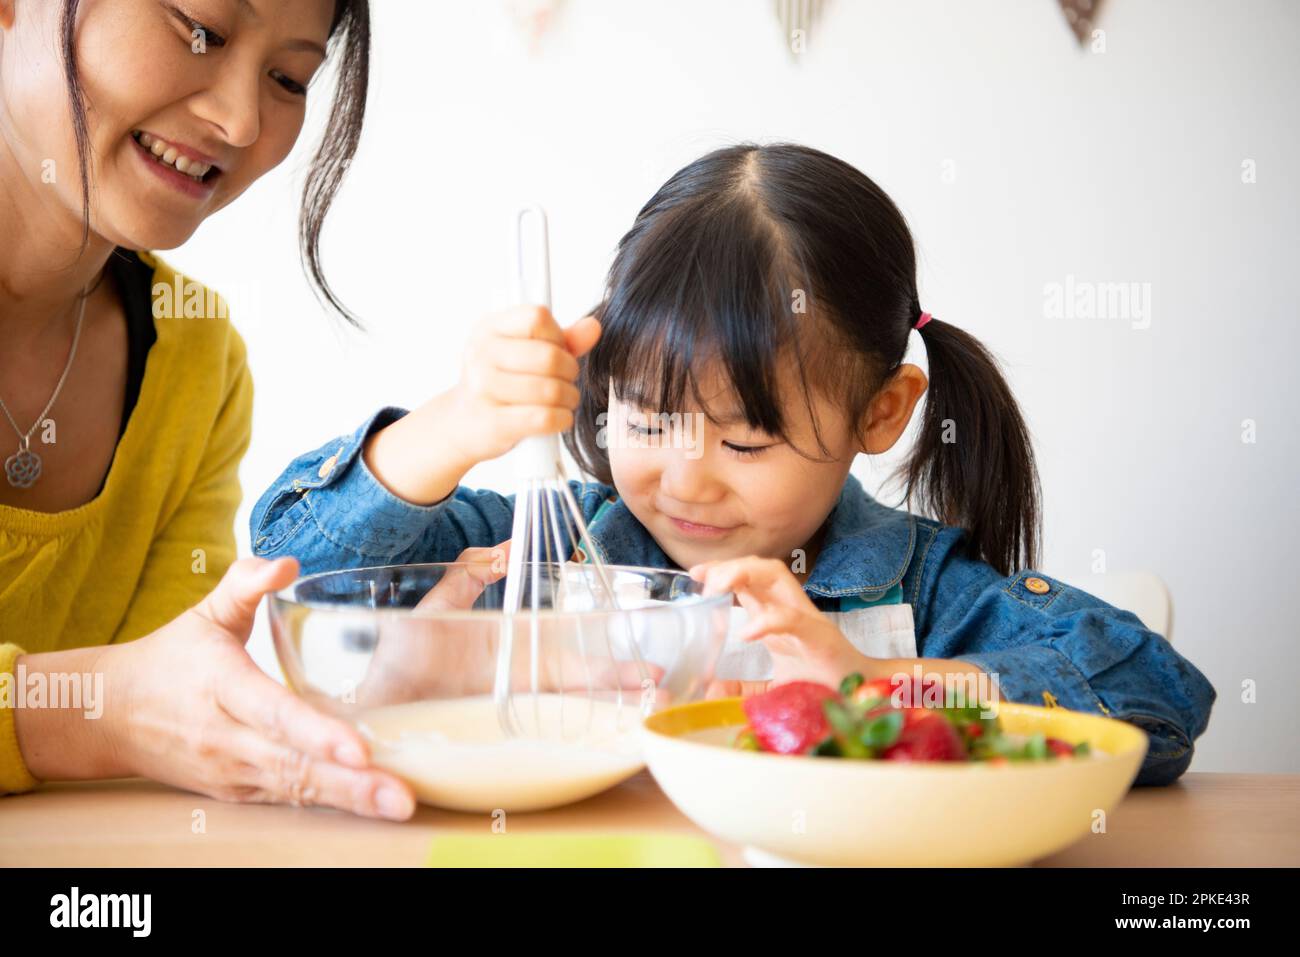 Parent and child making snacks Stock Photo